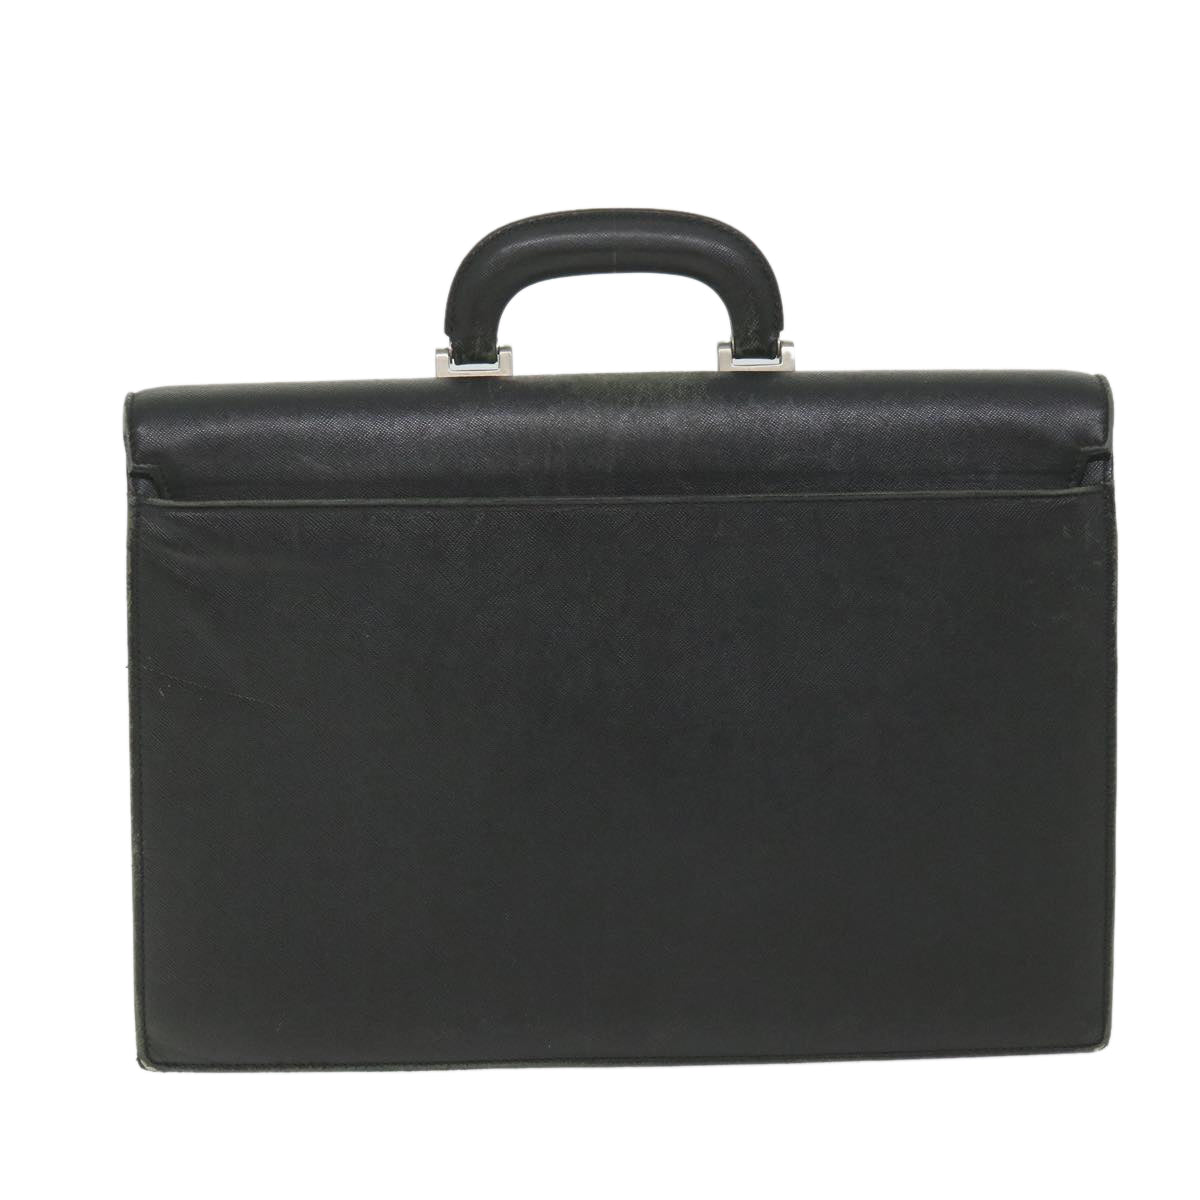 BURBERRY Briefcase Leather Black Auth 58915 - 0